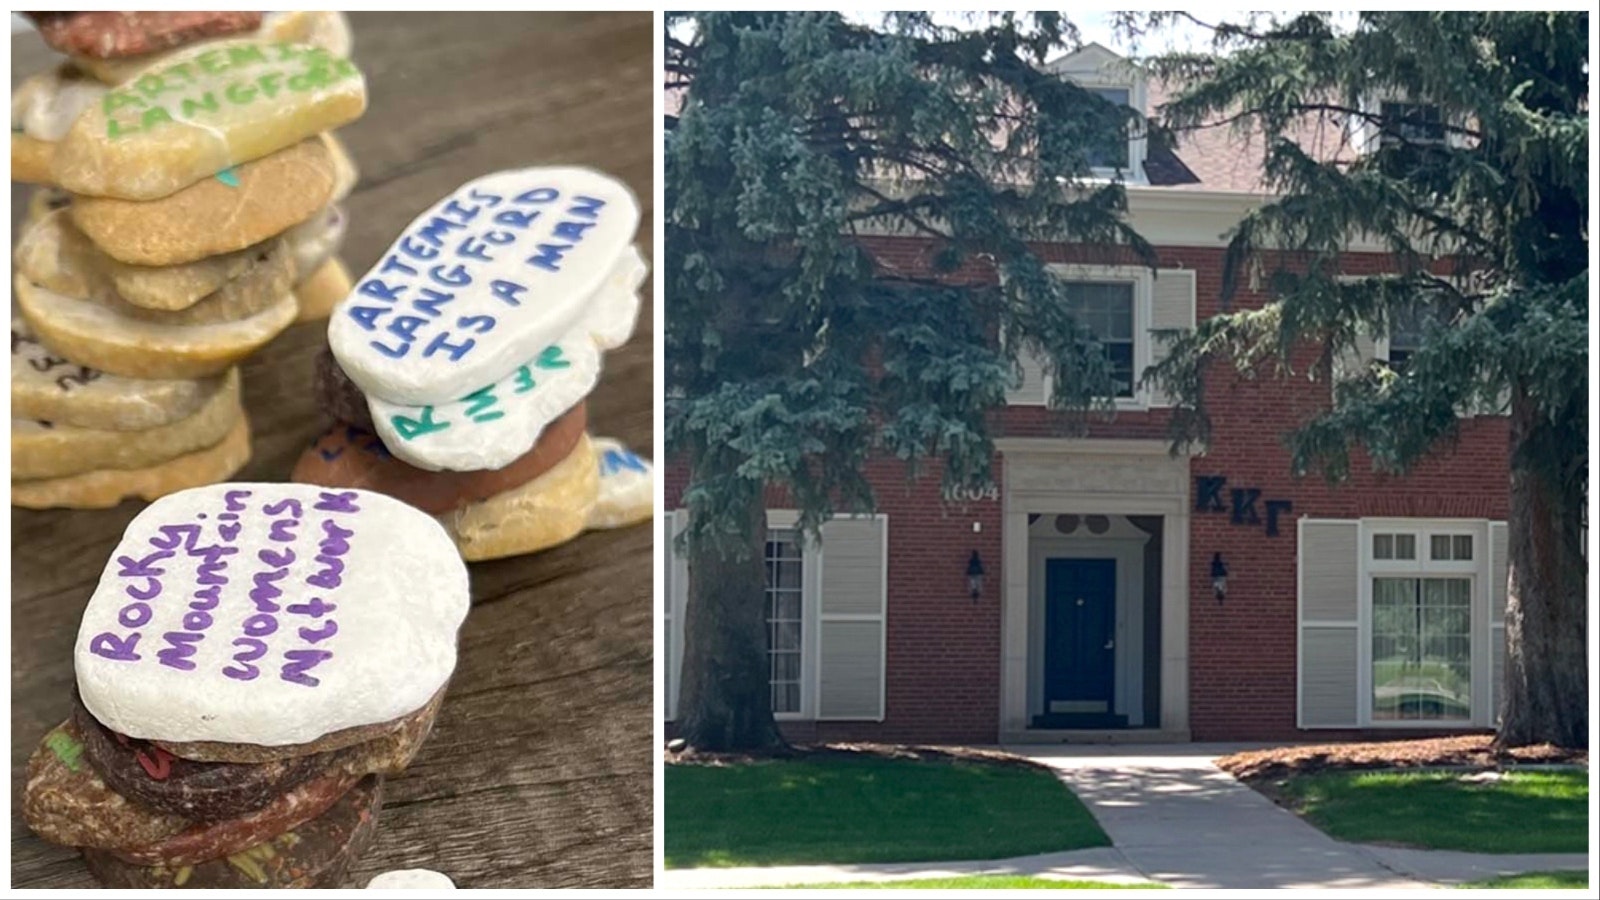 Some of the painted rocks that were spread around the University of Wyoming campus near the Kappa Kappa Gamma sorority house Thursday evening.